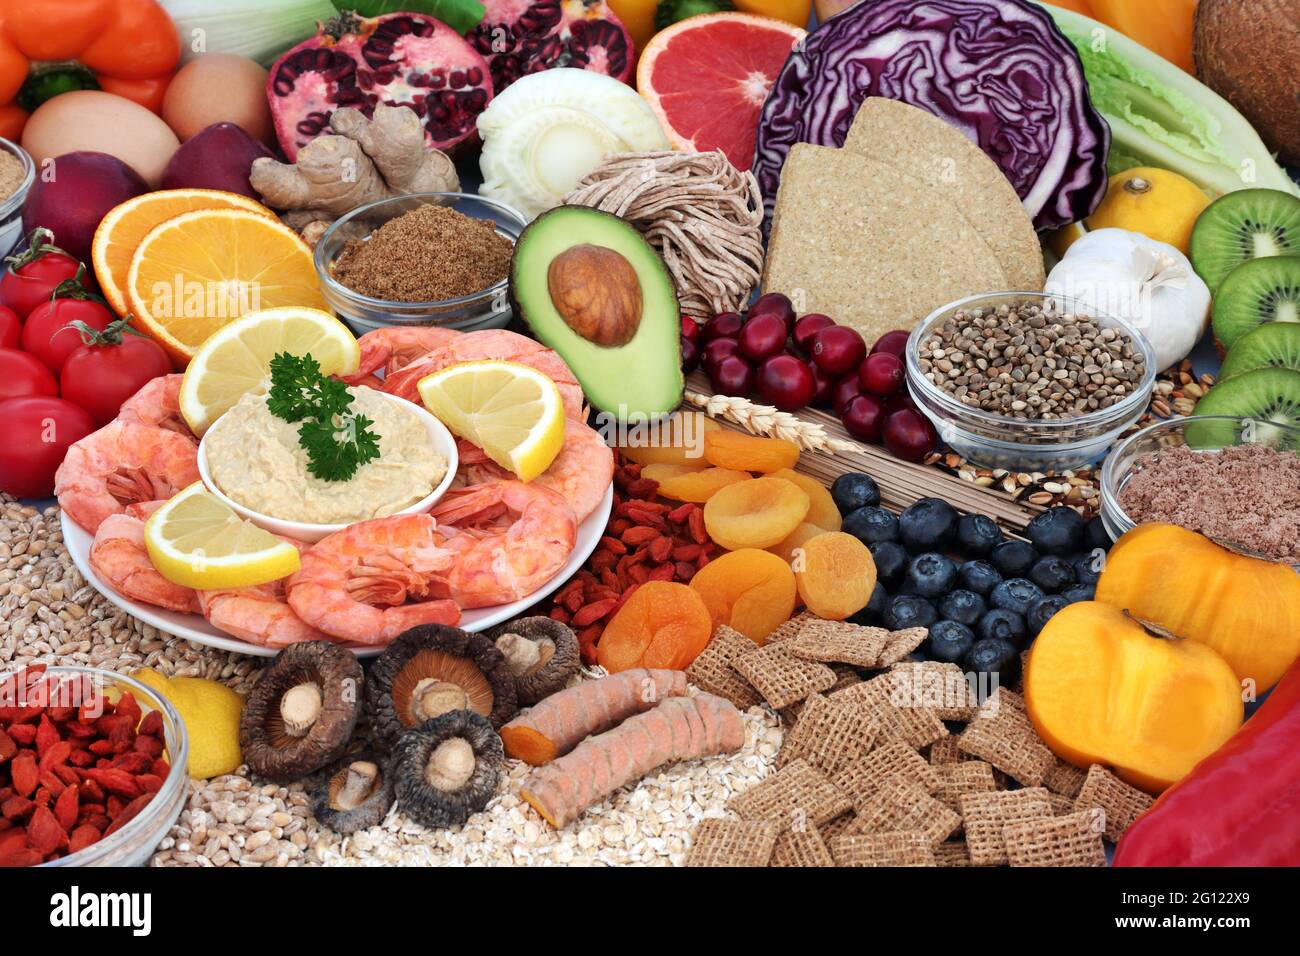 Health food for low cholesterol & low blood pressure diet high in antioxidants, protein, omega 3, vitamins, minerals, anthocyanins & fibre. Healthcare Stock Photo